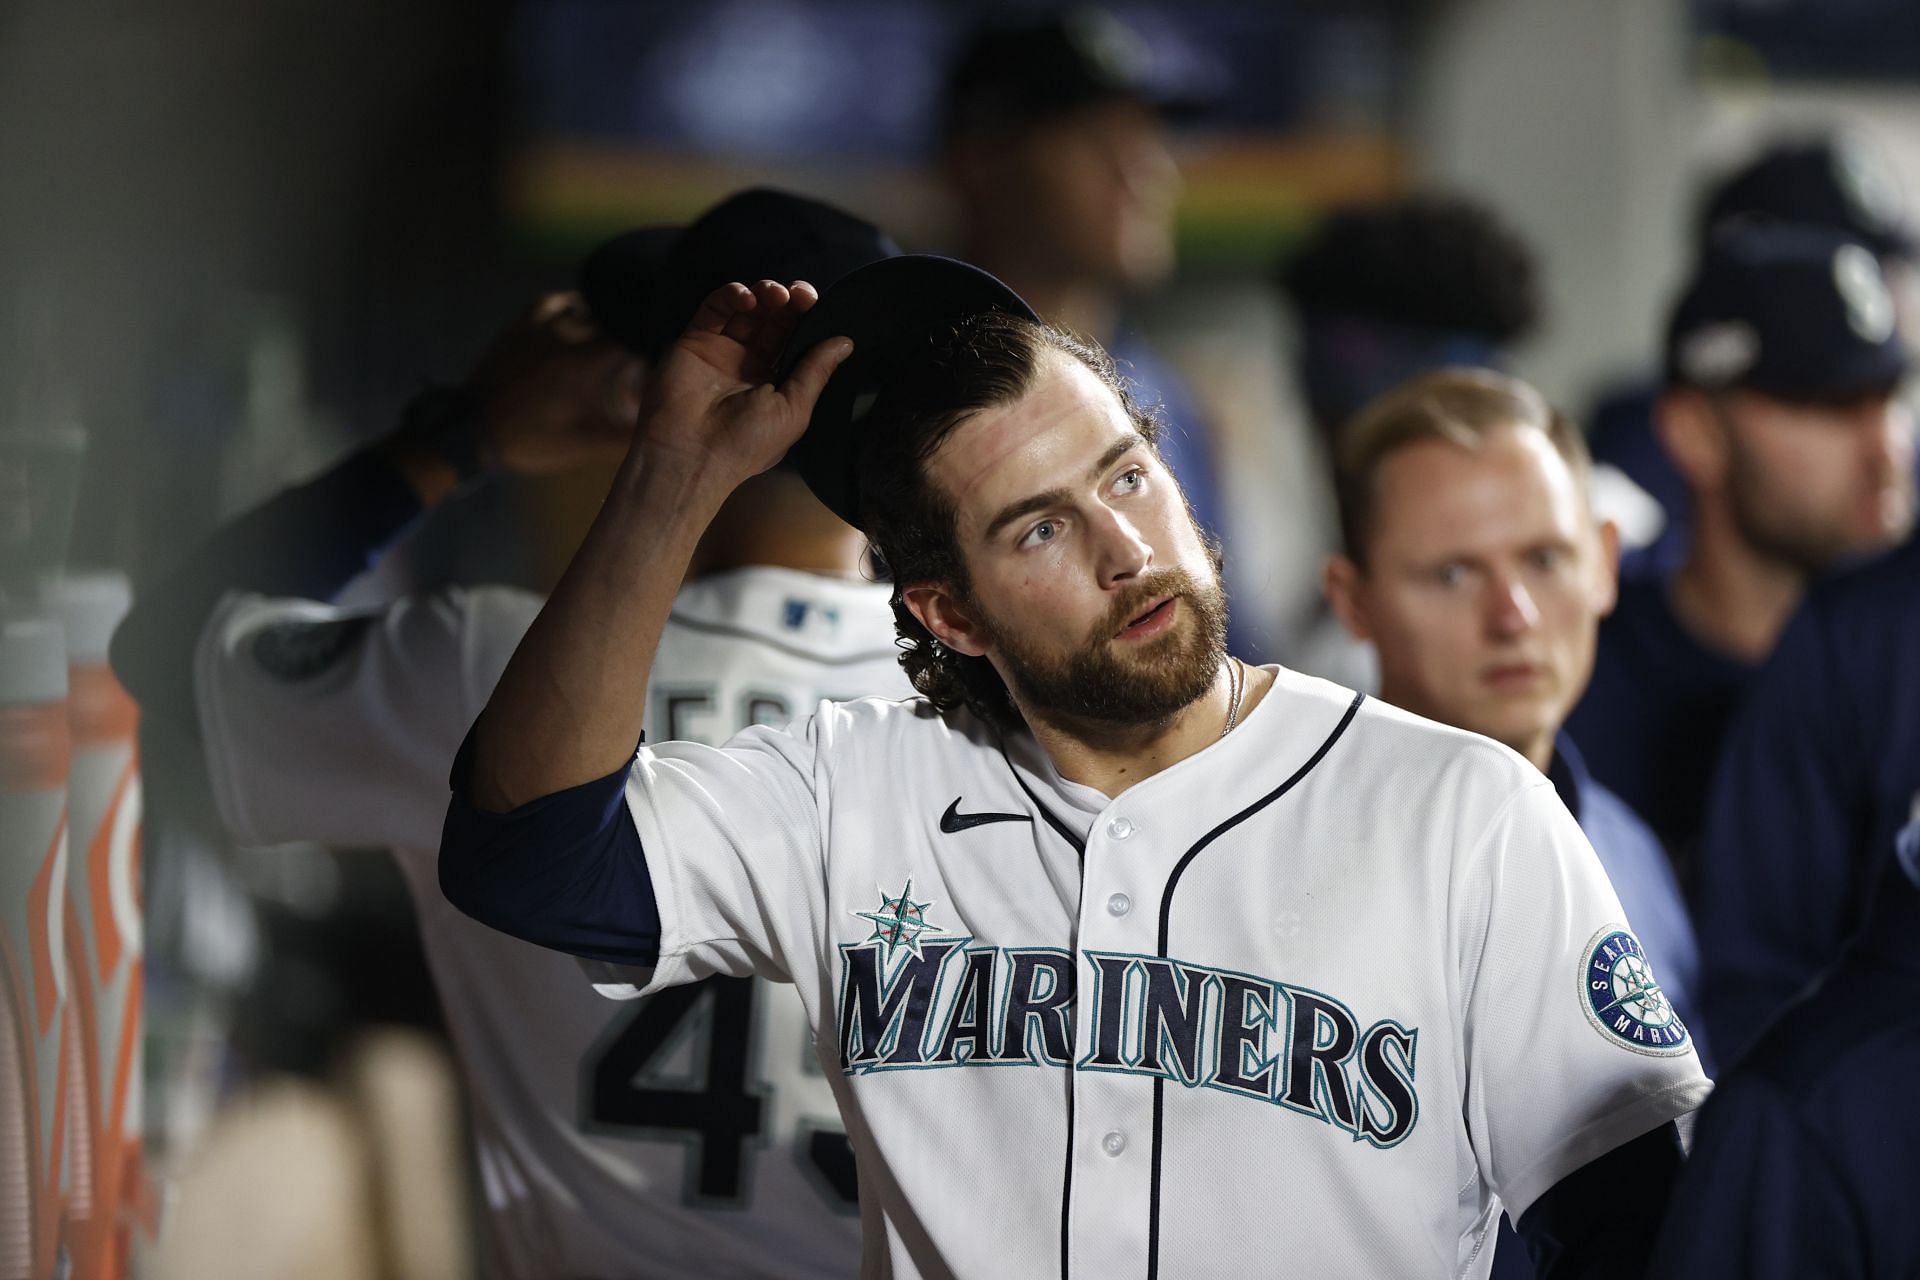 Seattle Mariners fans irritated by report that team didn't meet